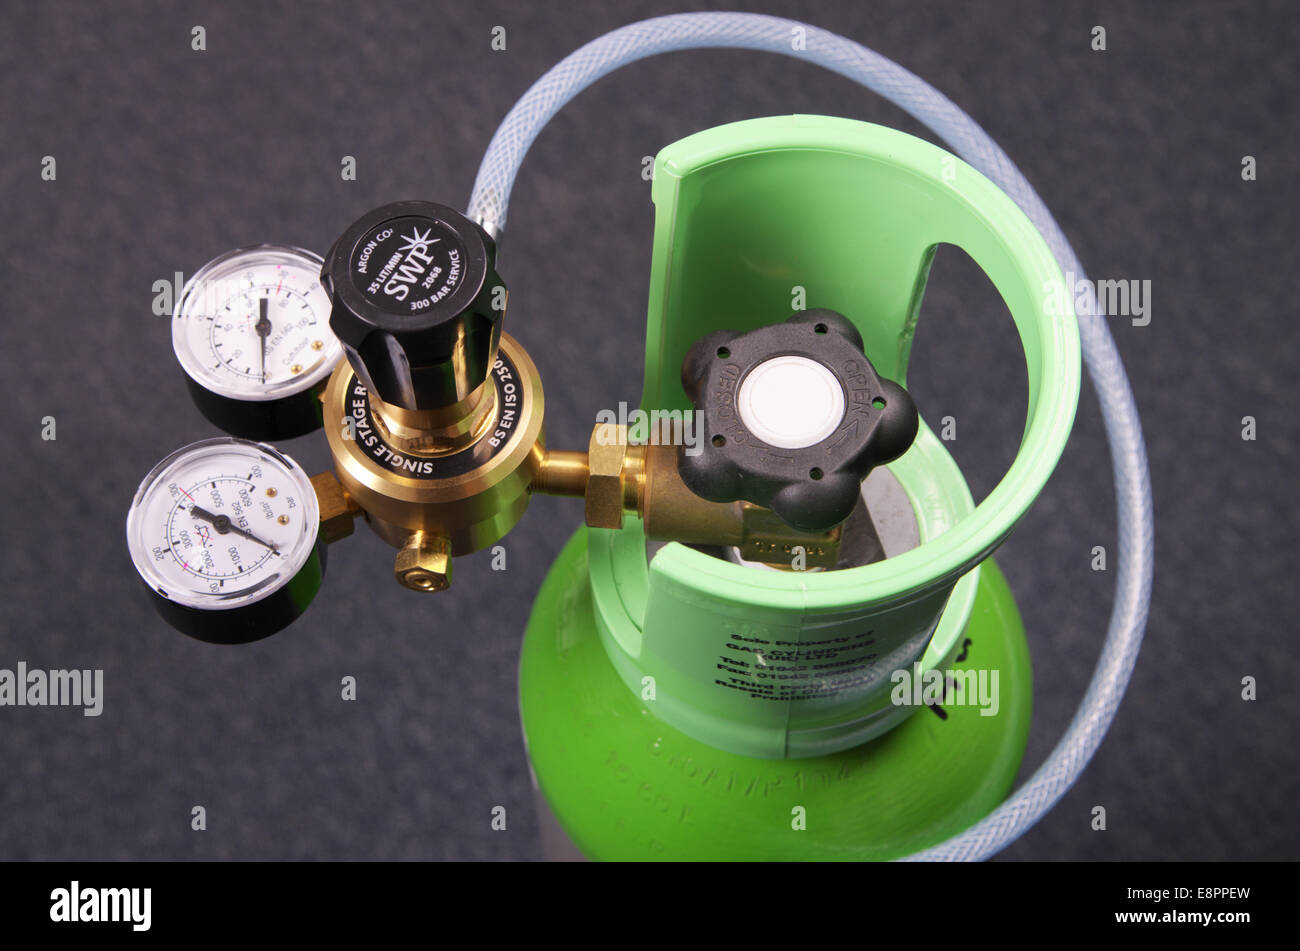 Small Ten Litre Size Argon CO2 Mix Gas Bottle With Regulator For MIG Welding Stock Photo